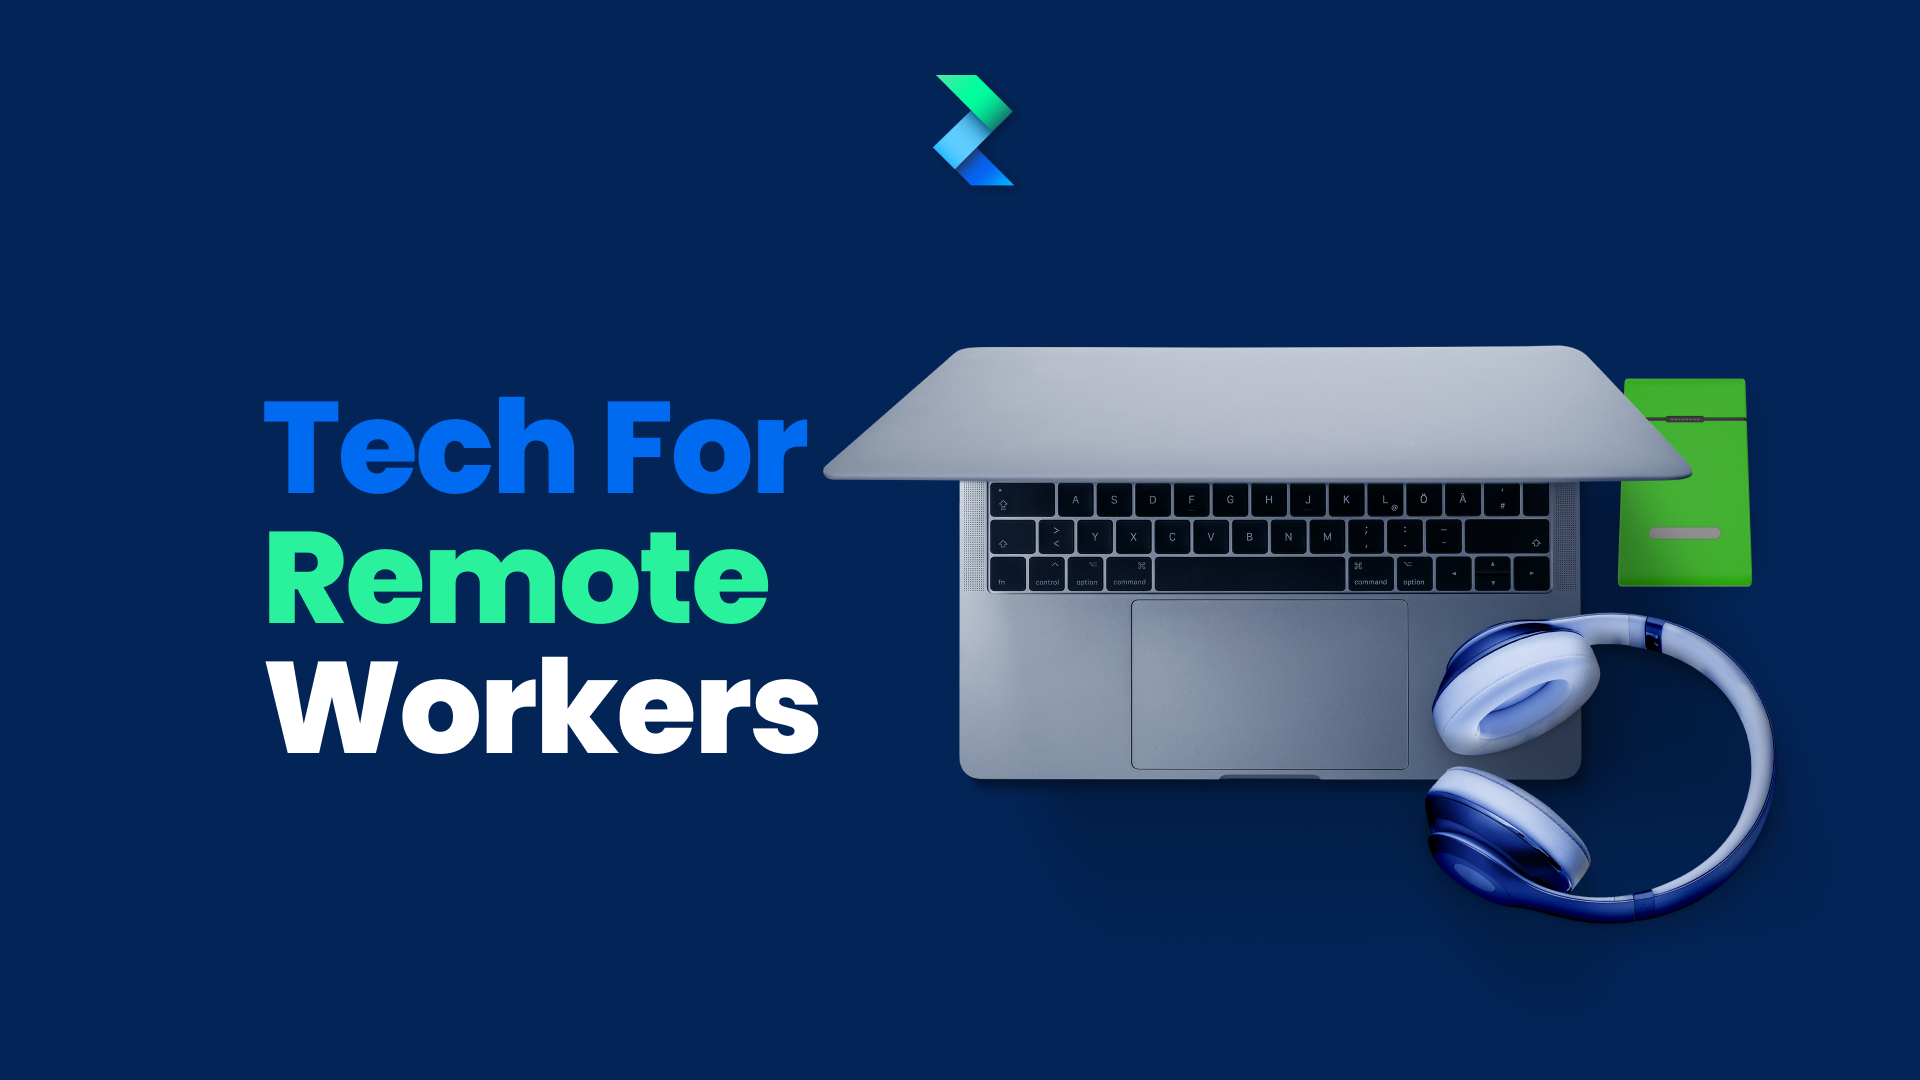 Tech for Remote Workers